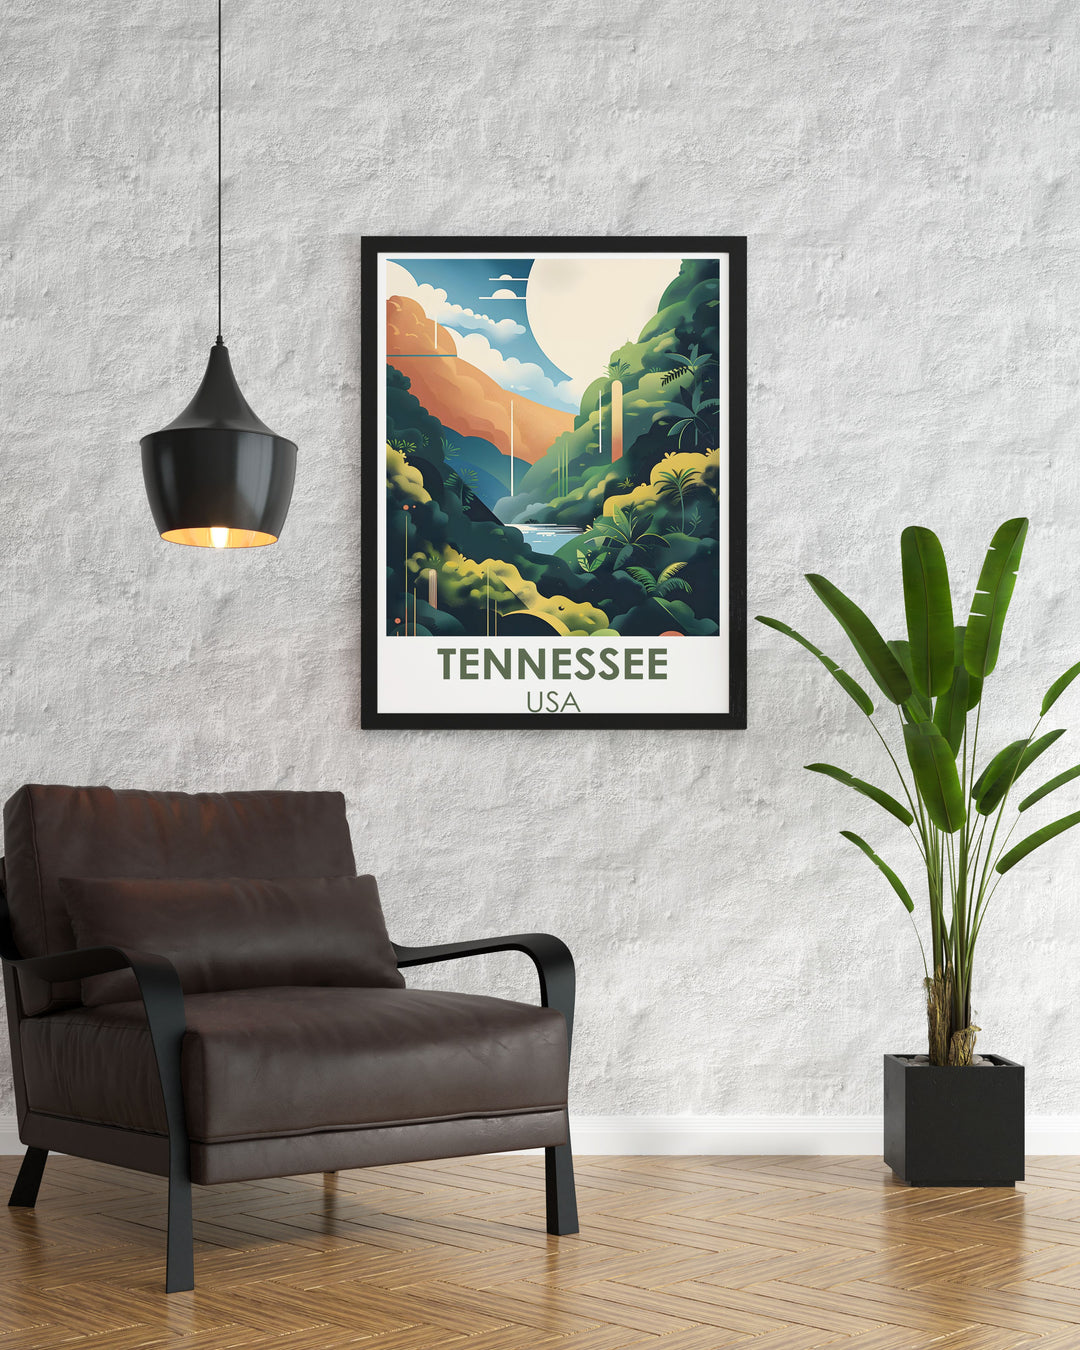 Nashville Tennessee Country Music Poster showcasing the historic Ryman Auditorium and the serene beauty of Great Smoky Mountains National Park. This artwork is a must have for fans of country music and natural landscapes.